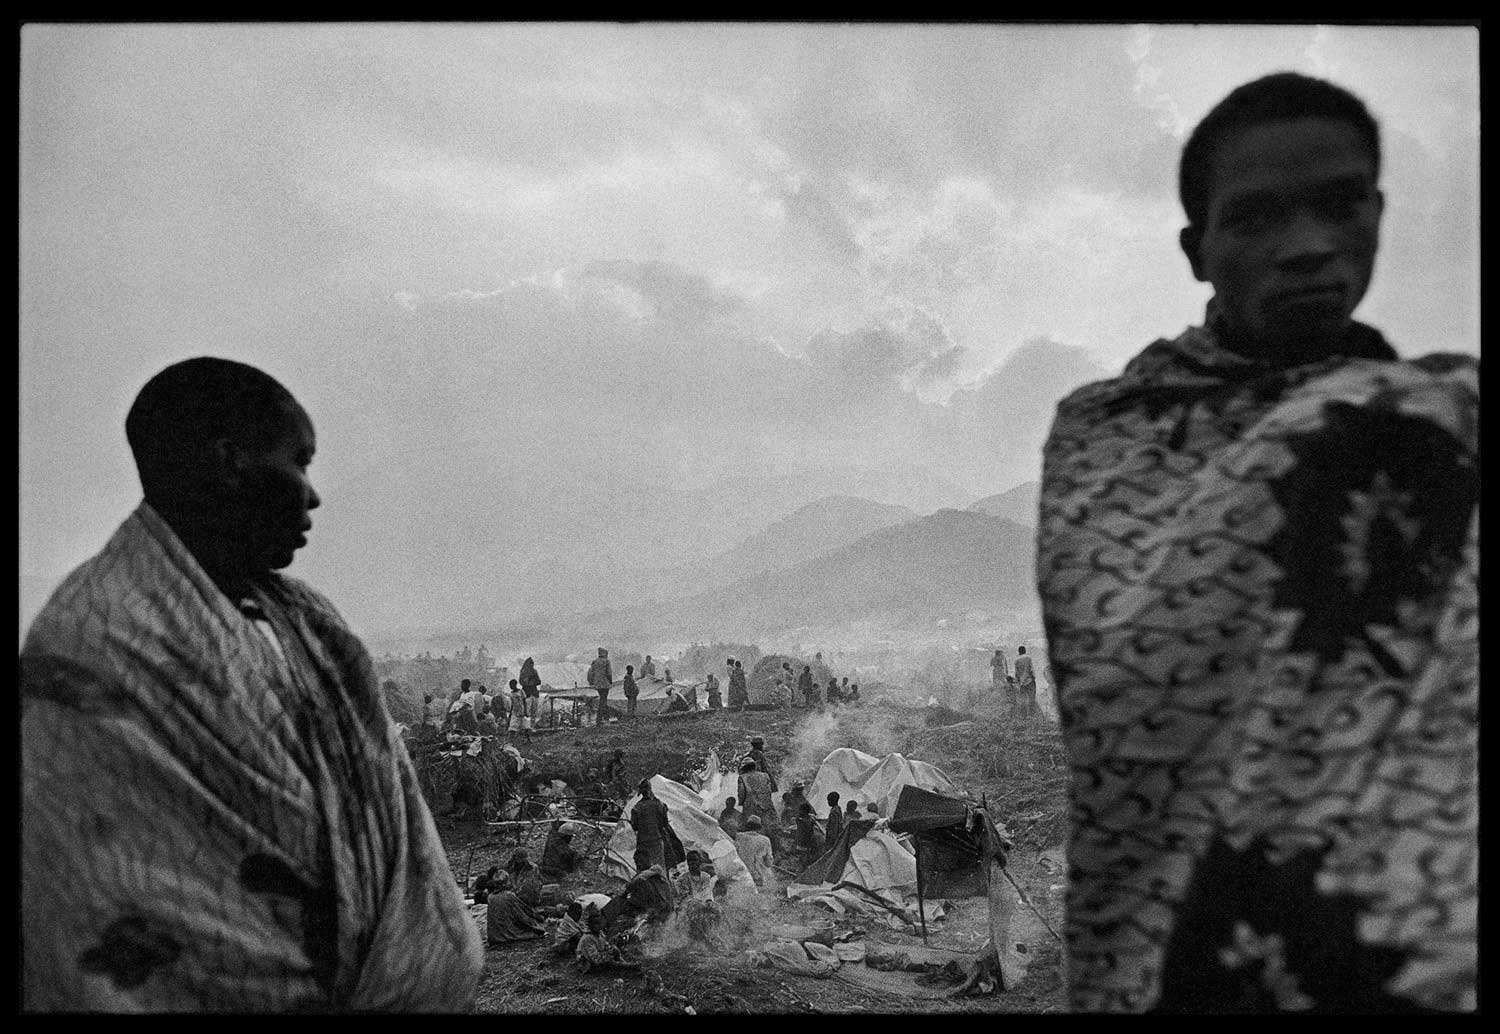 Hutus who fled into Zaire set up vast encampments in the plains below the volcanoes outside the town of Goma in 1994.